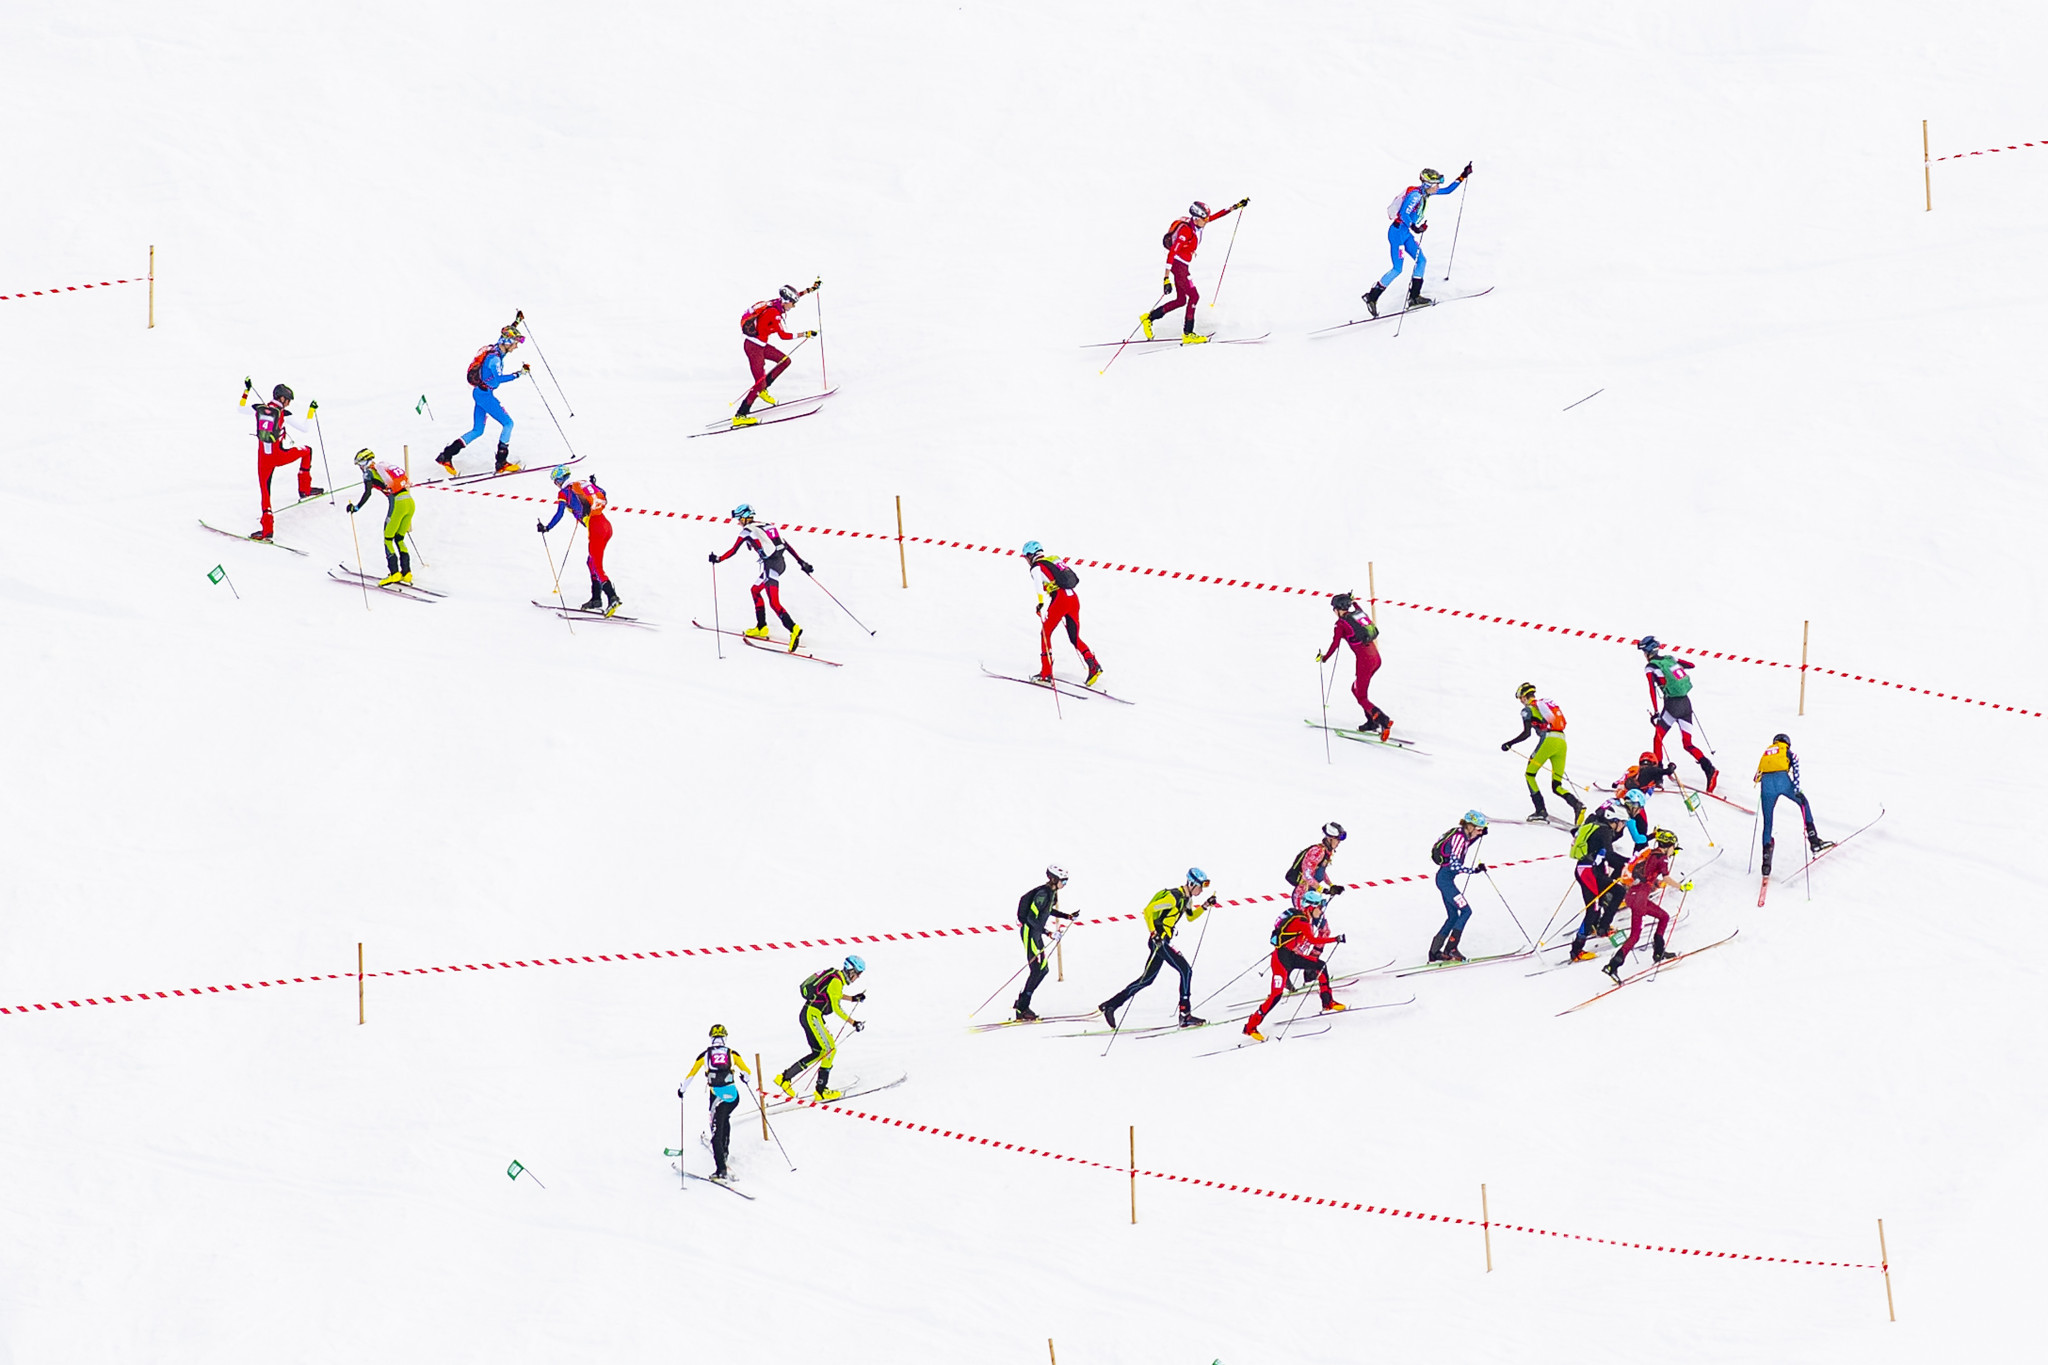 Ski mountaineering has been included on the programme for the 2025 Asian Winter Games in Harbin, it has been announced ©Getty Images